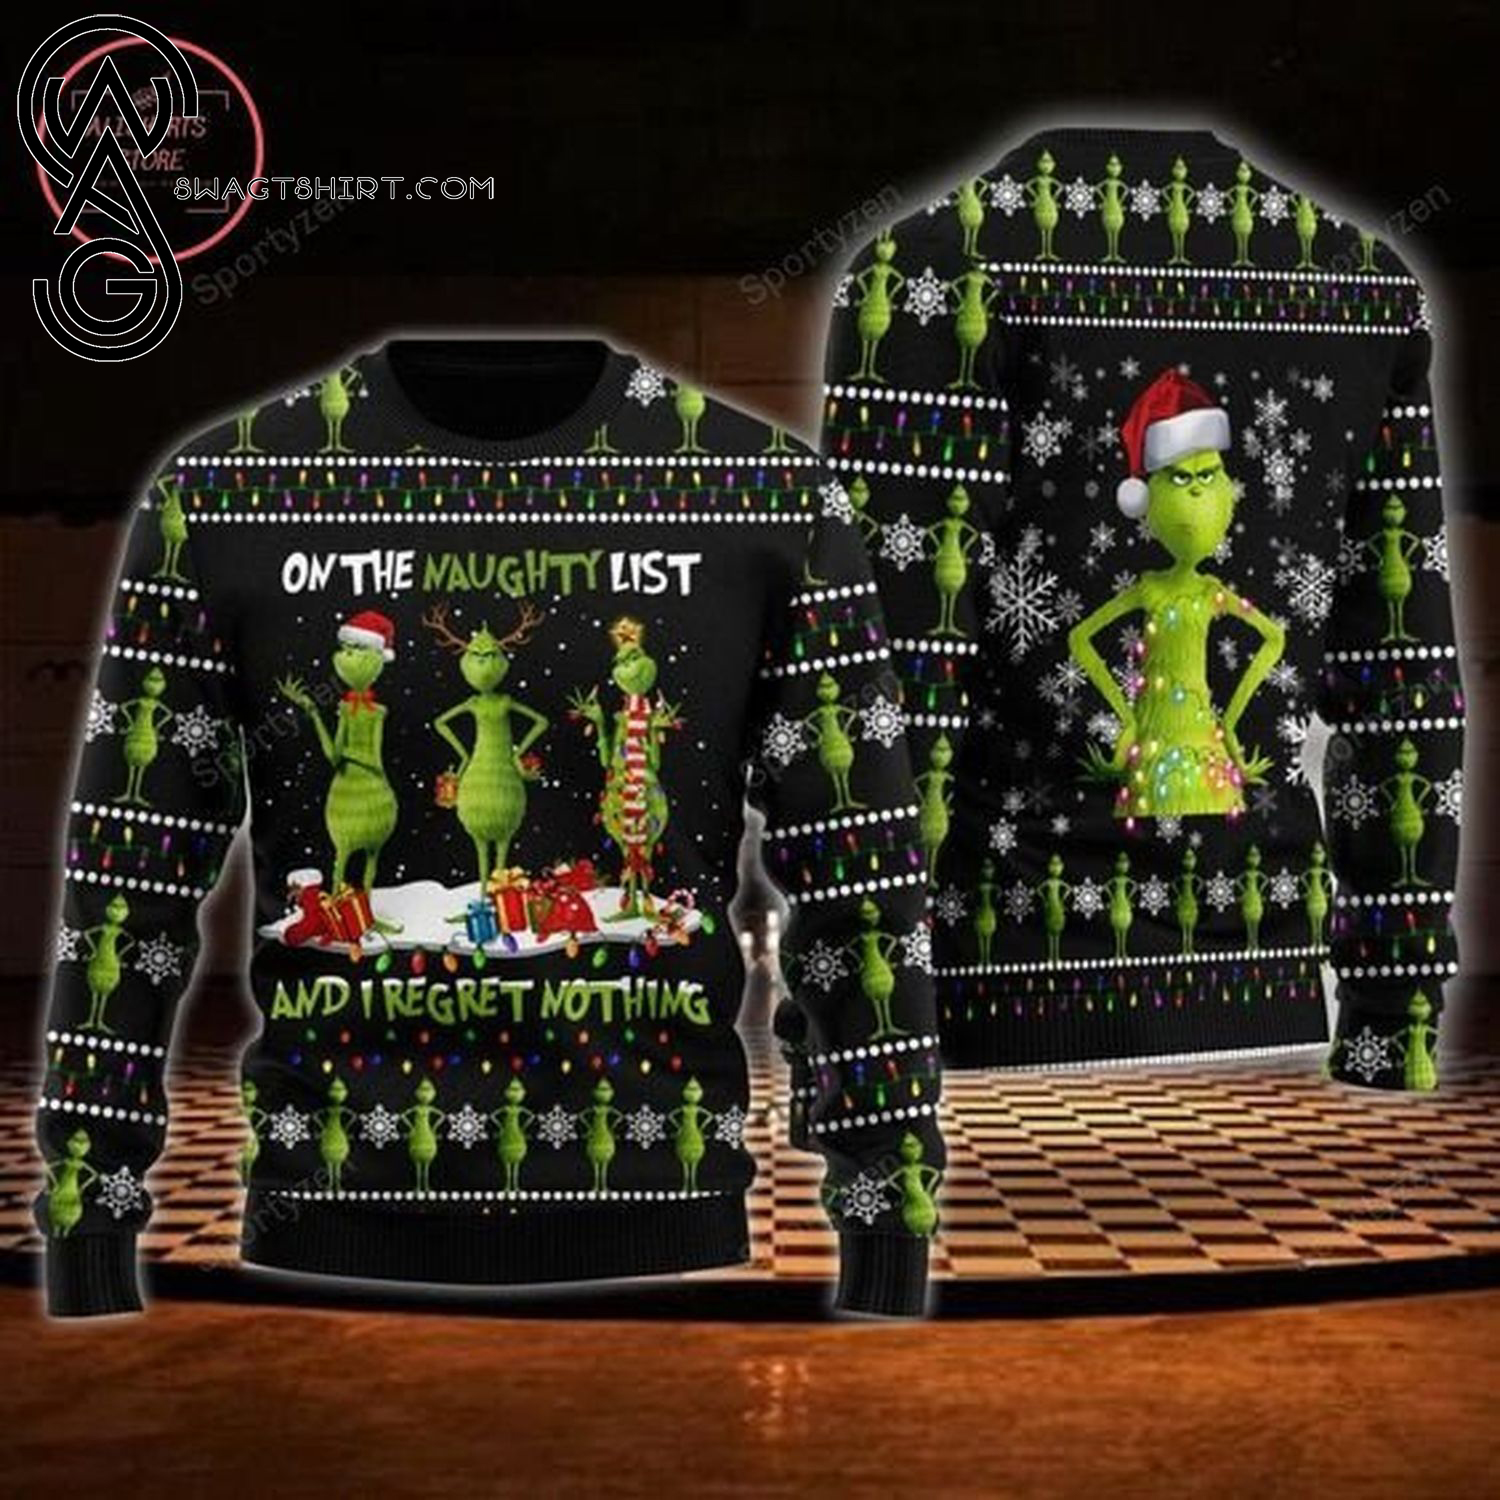 The Grinch On The Naughty List And I Regret Nothing Ugly Christmas Sweater